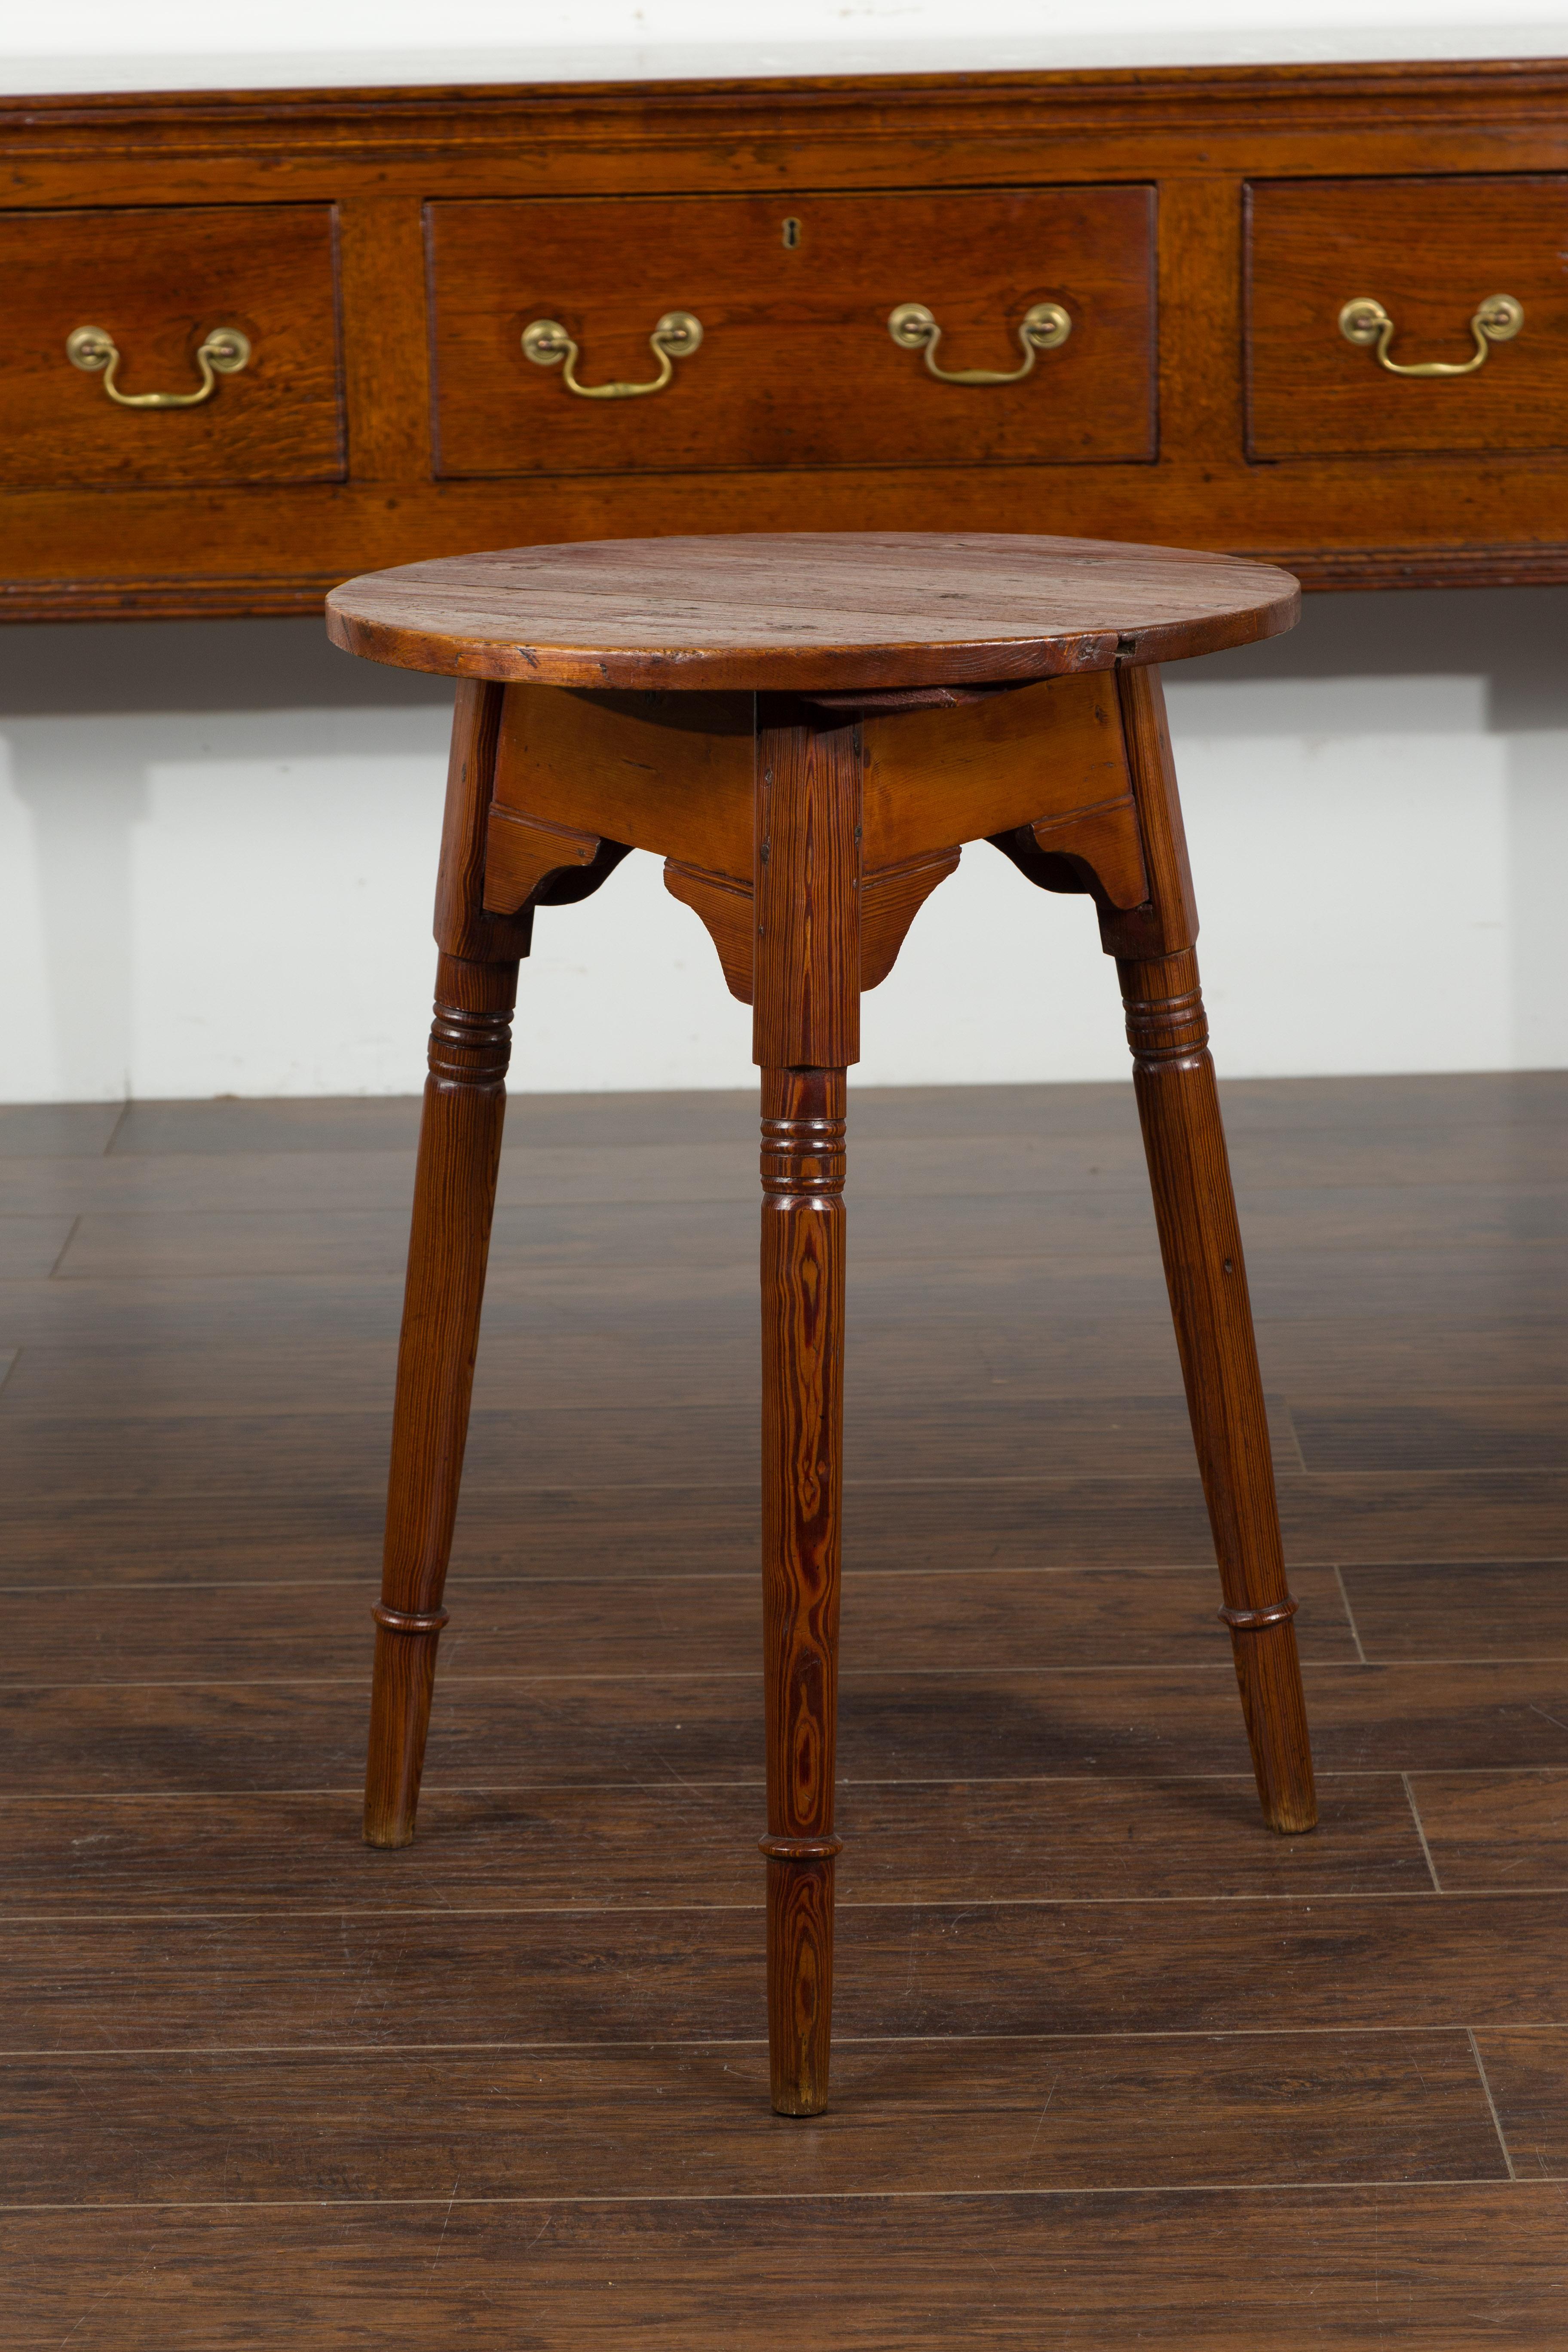 A small English pine cricket table from the mid-19th century, with carved apron and slender turned legs. Born in England during the second quarter of the 19th century, this pine cricket table features a circular top sitting above an apron carved on